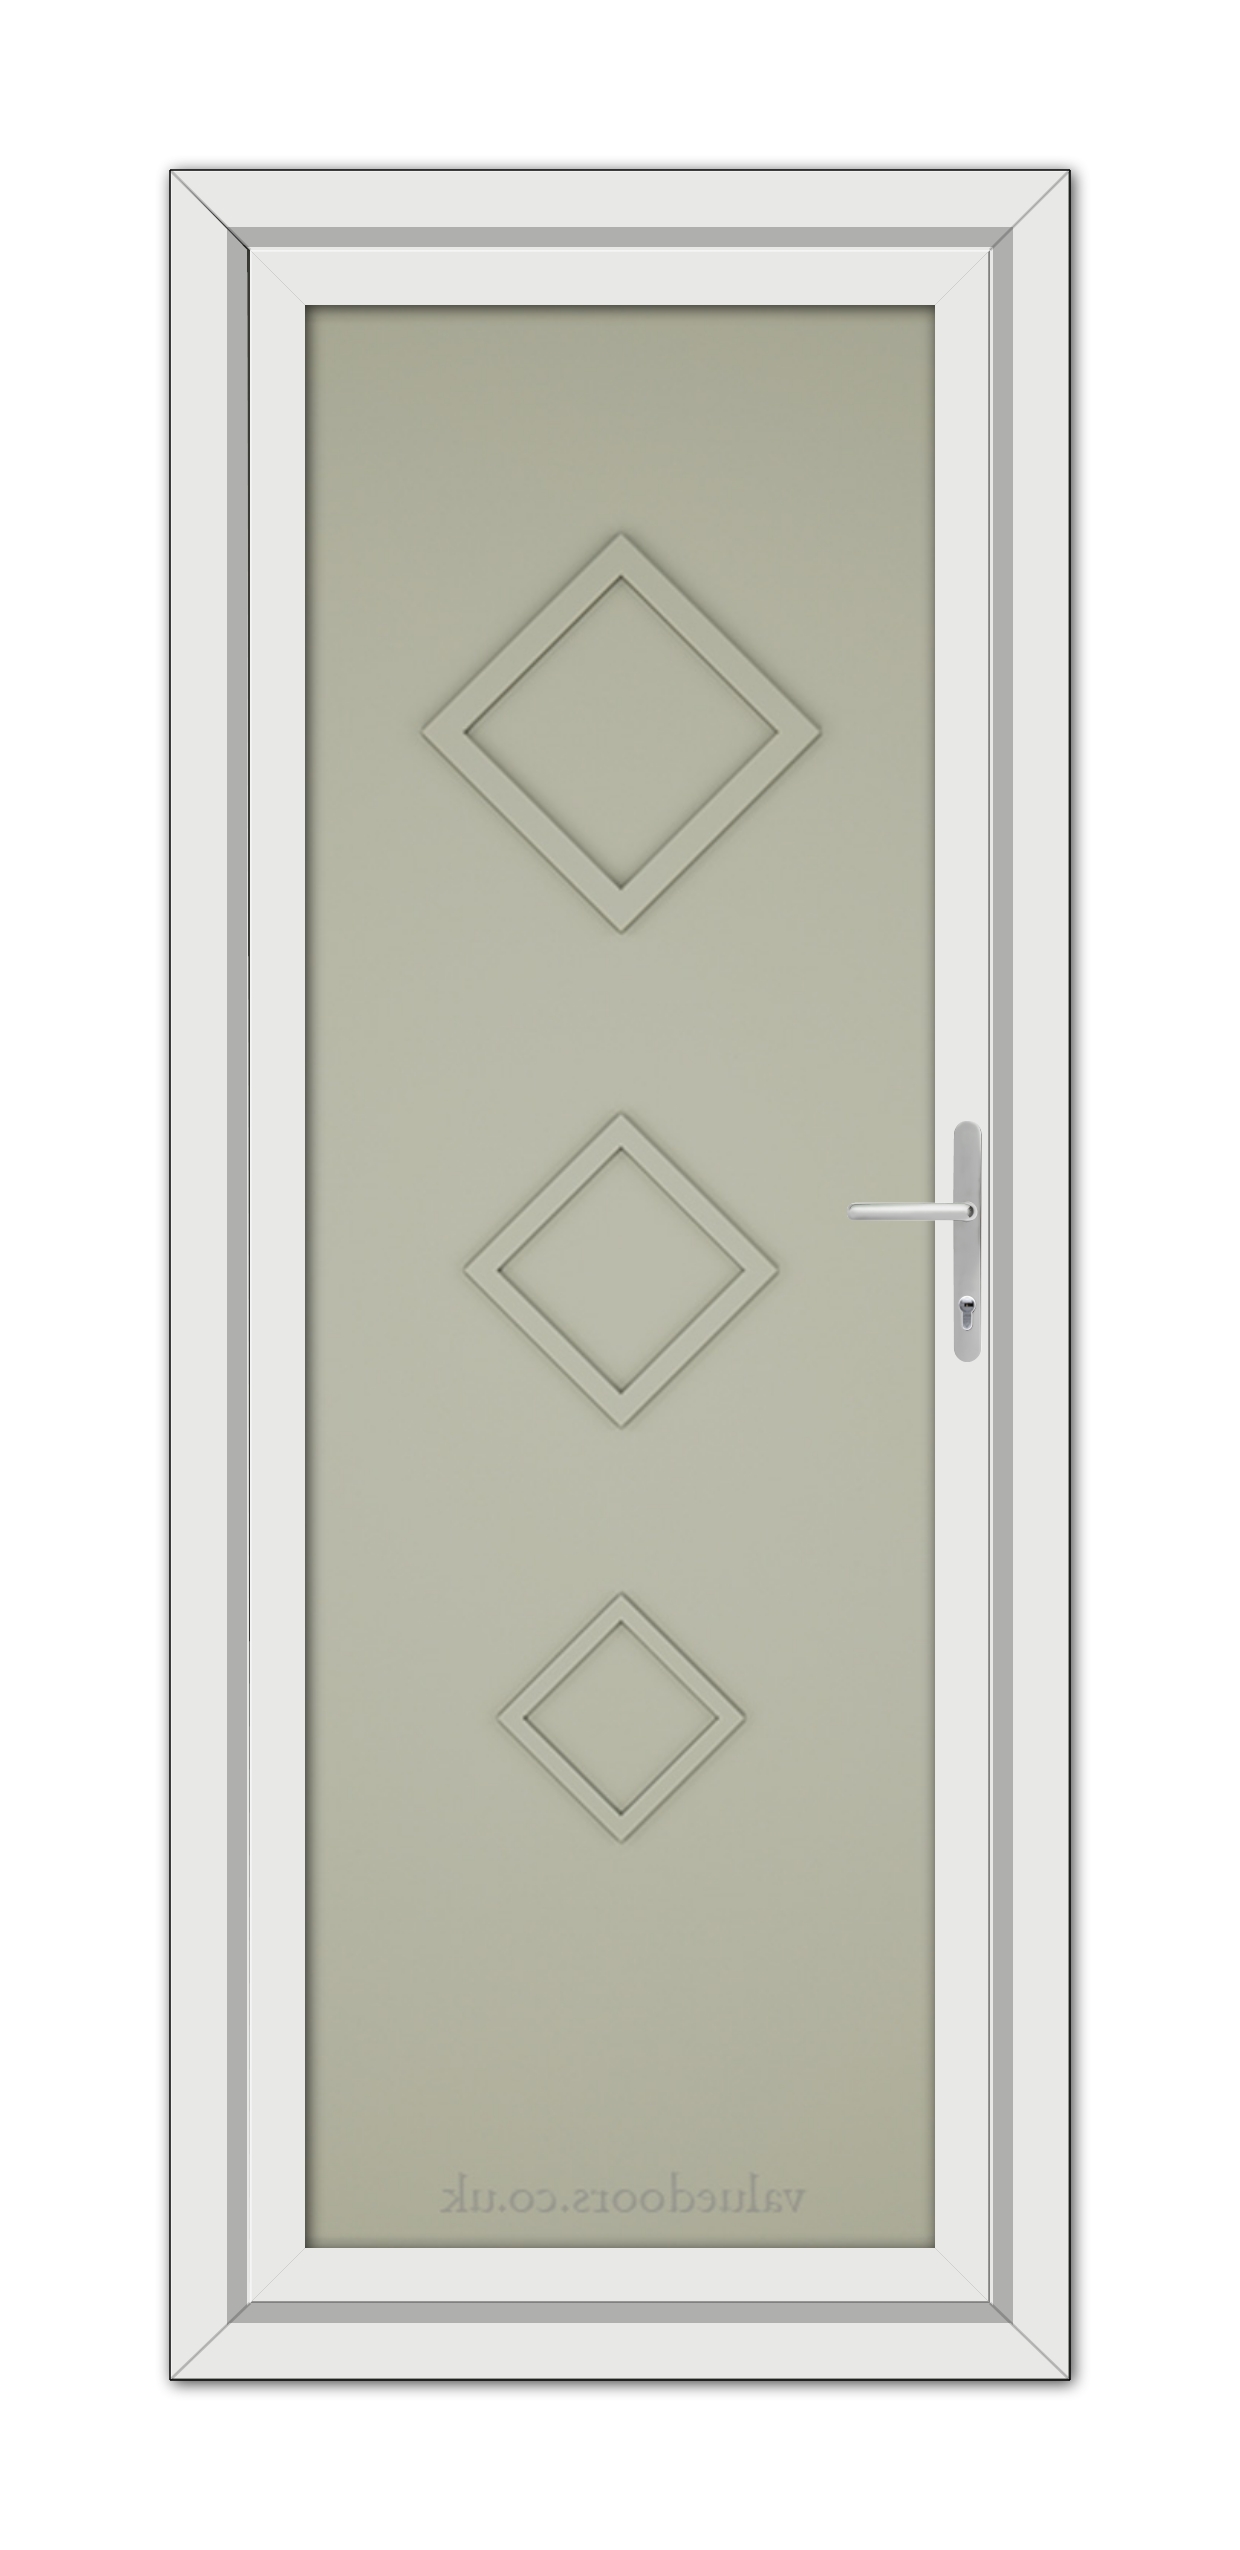 A Agate Grey Modern 5123 Solid uPVC door with three diamond-shaped window panels and a silver handle, framed by a white border.